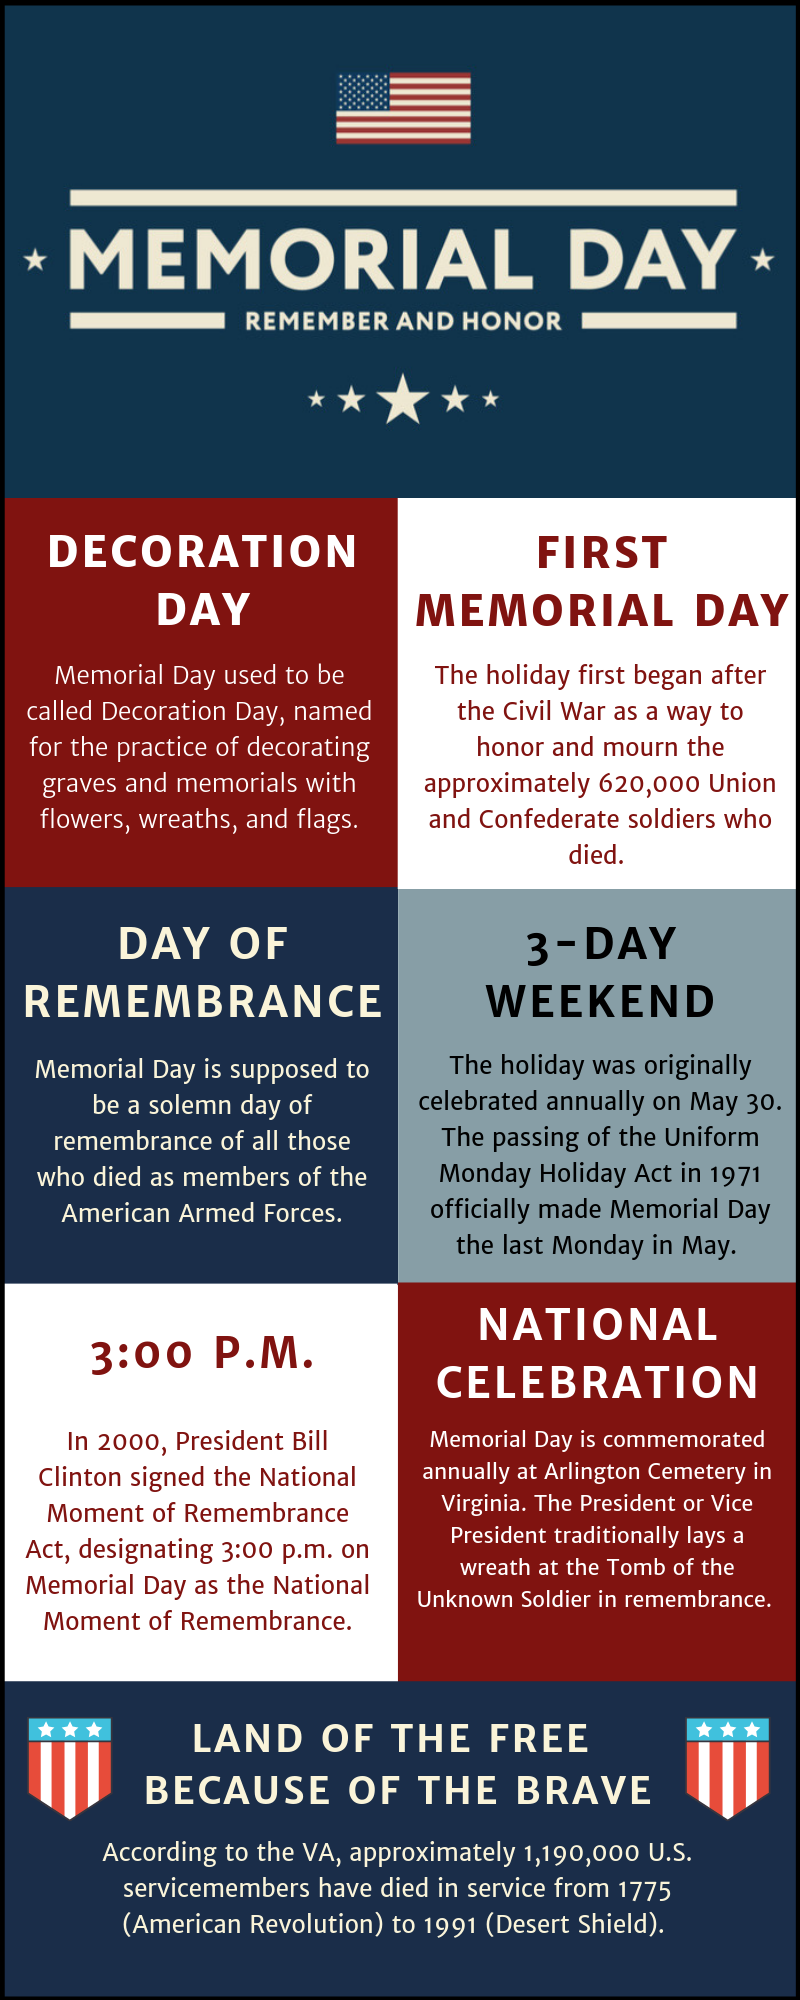 land-of-the-free-because-of-the-brave-memorial-day-2019